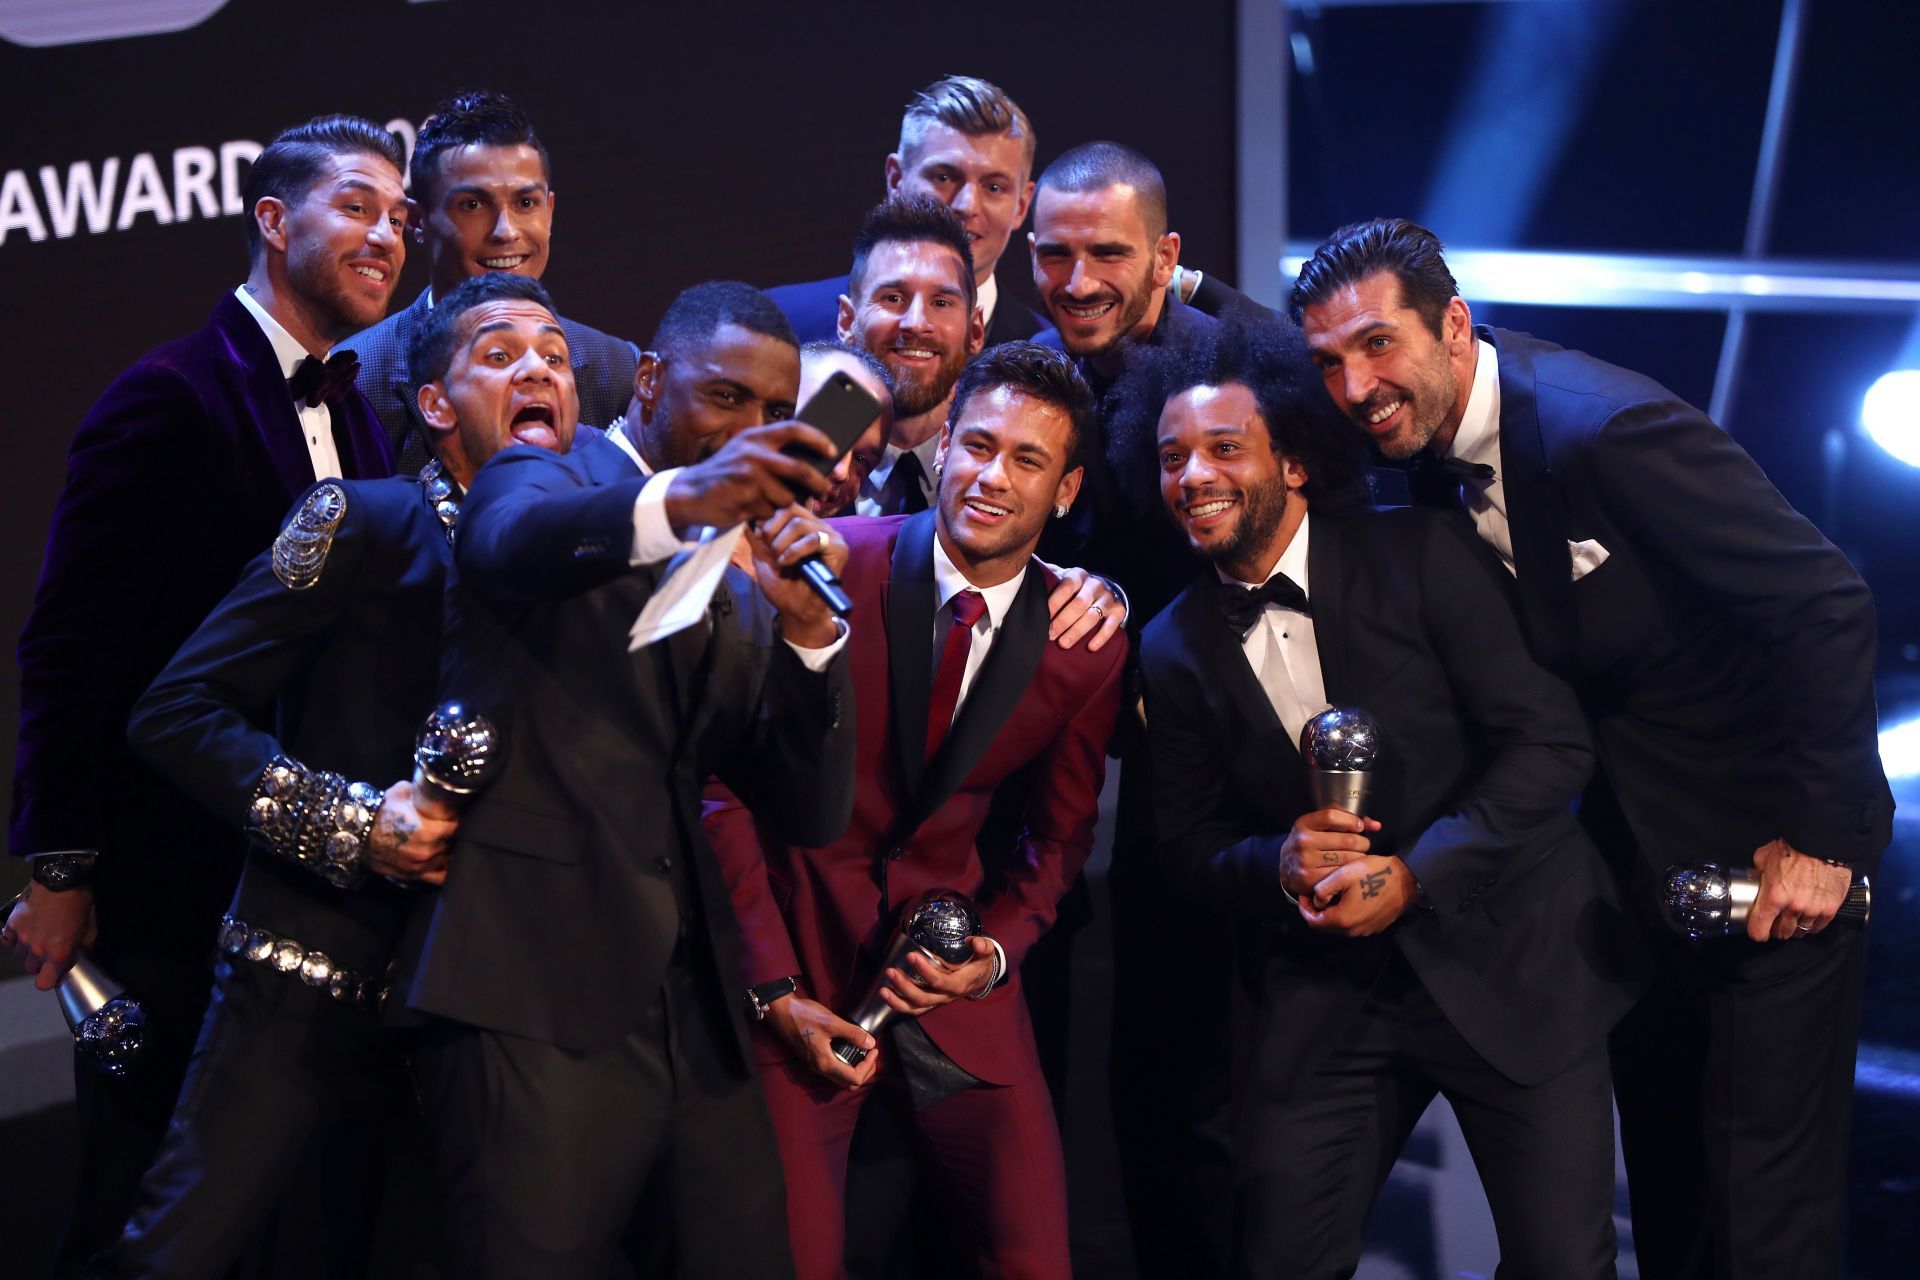 The shortlist for FIFPro World XI was announced on Tuesday.